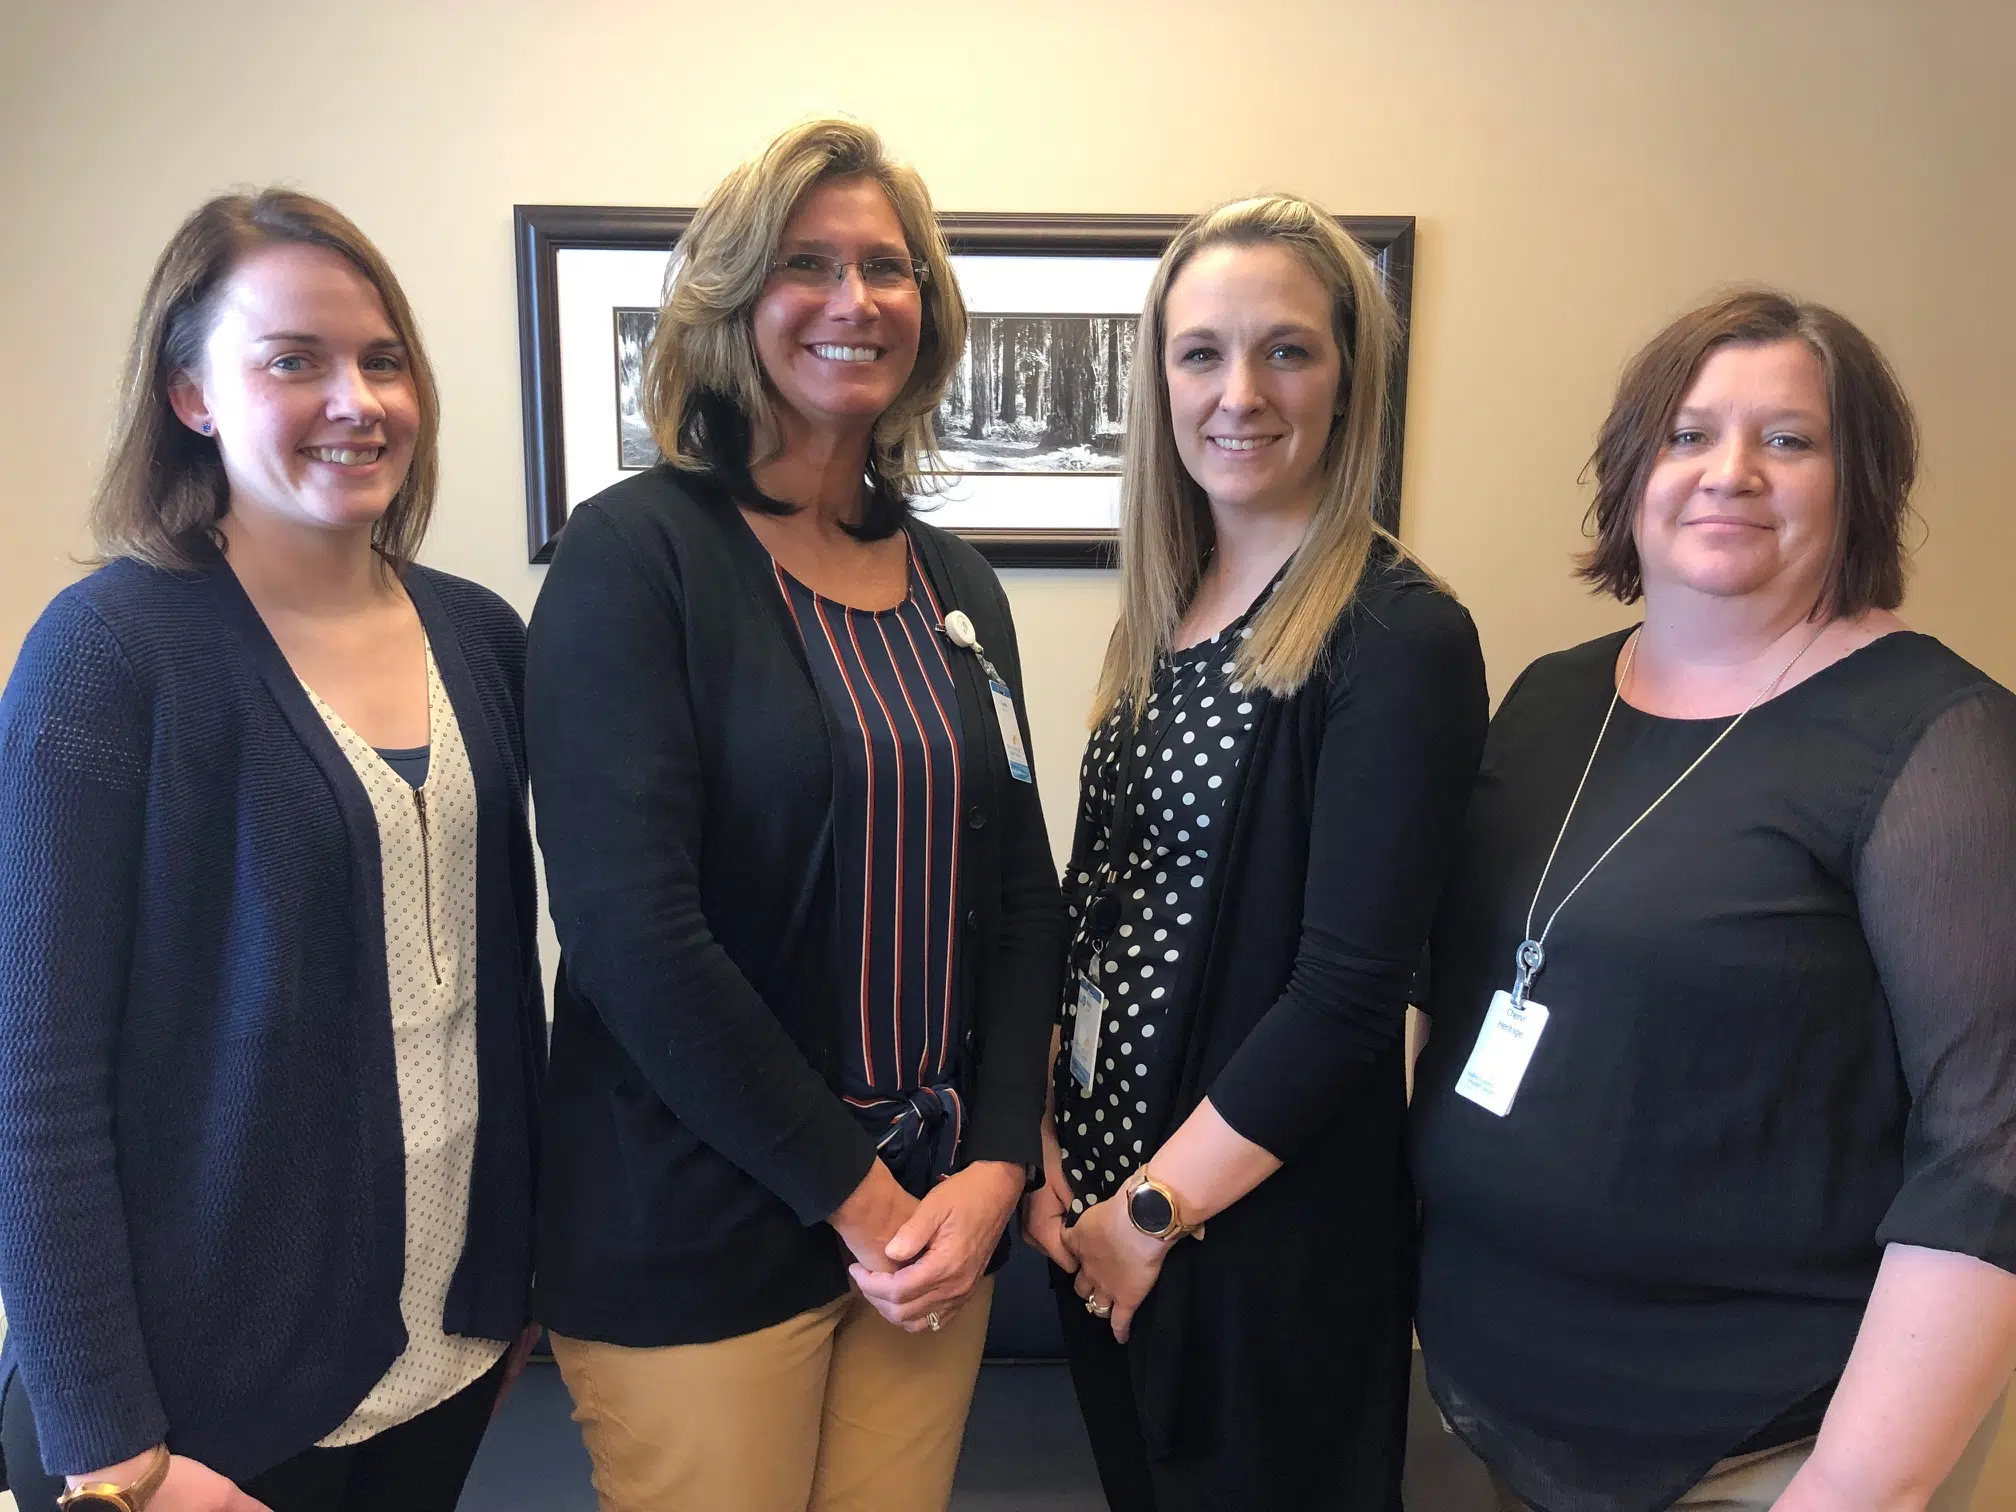 Valley County Health System celebrates Mental Health Month during May